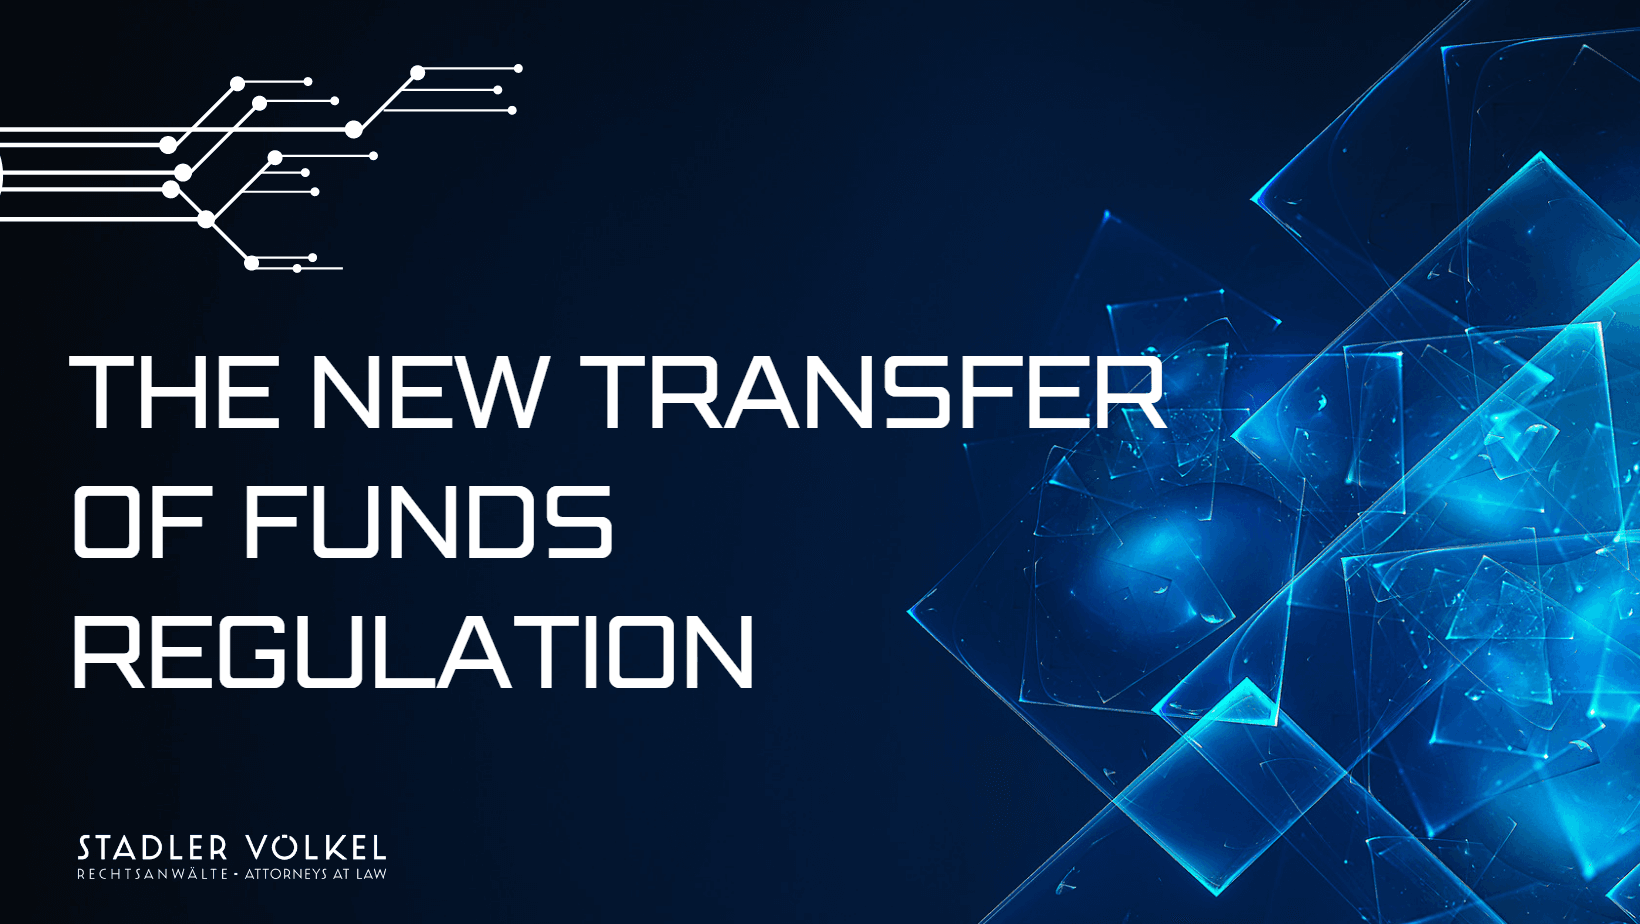 The new Transfer of Funds Regulation